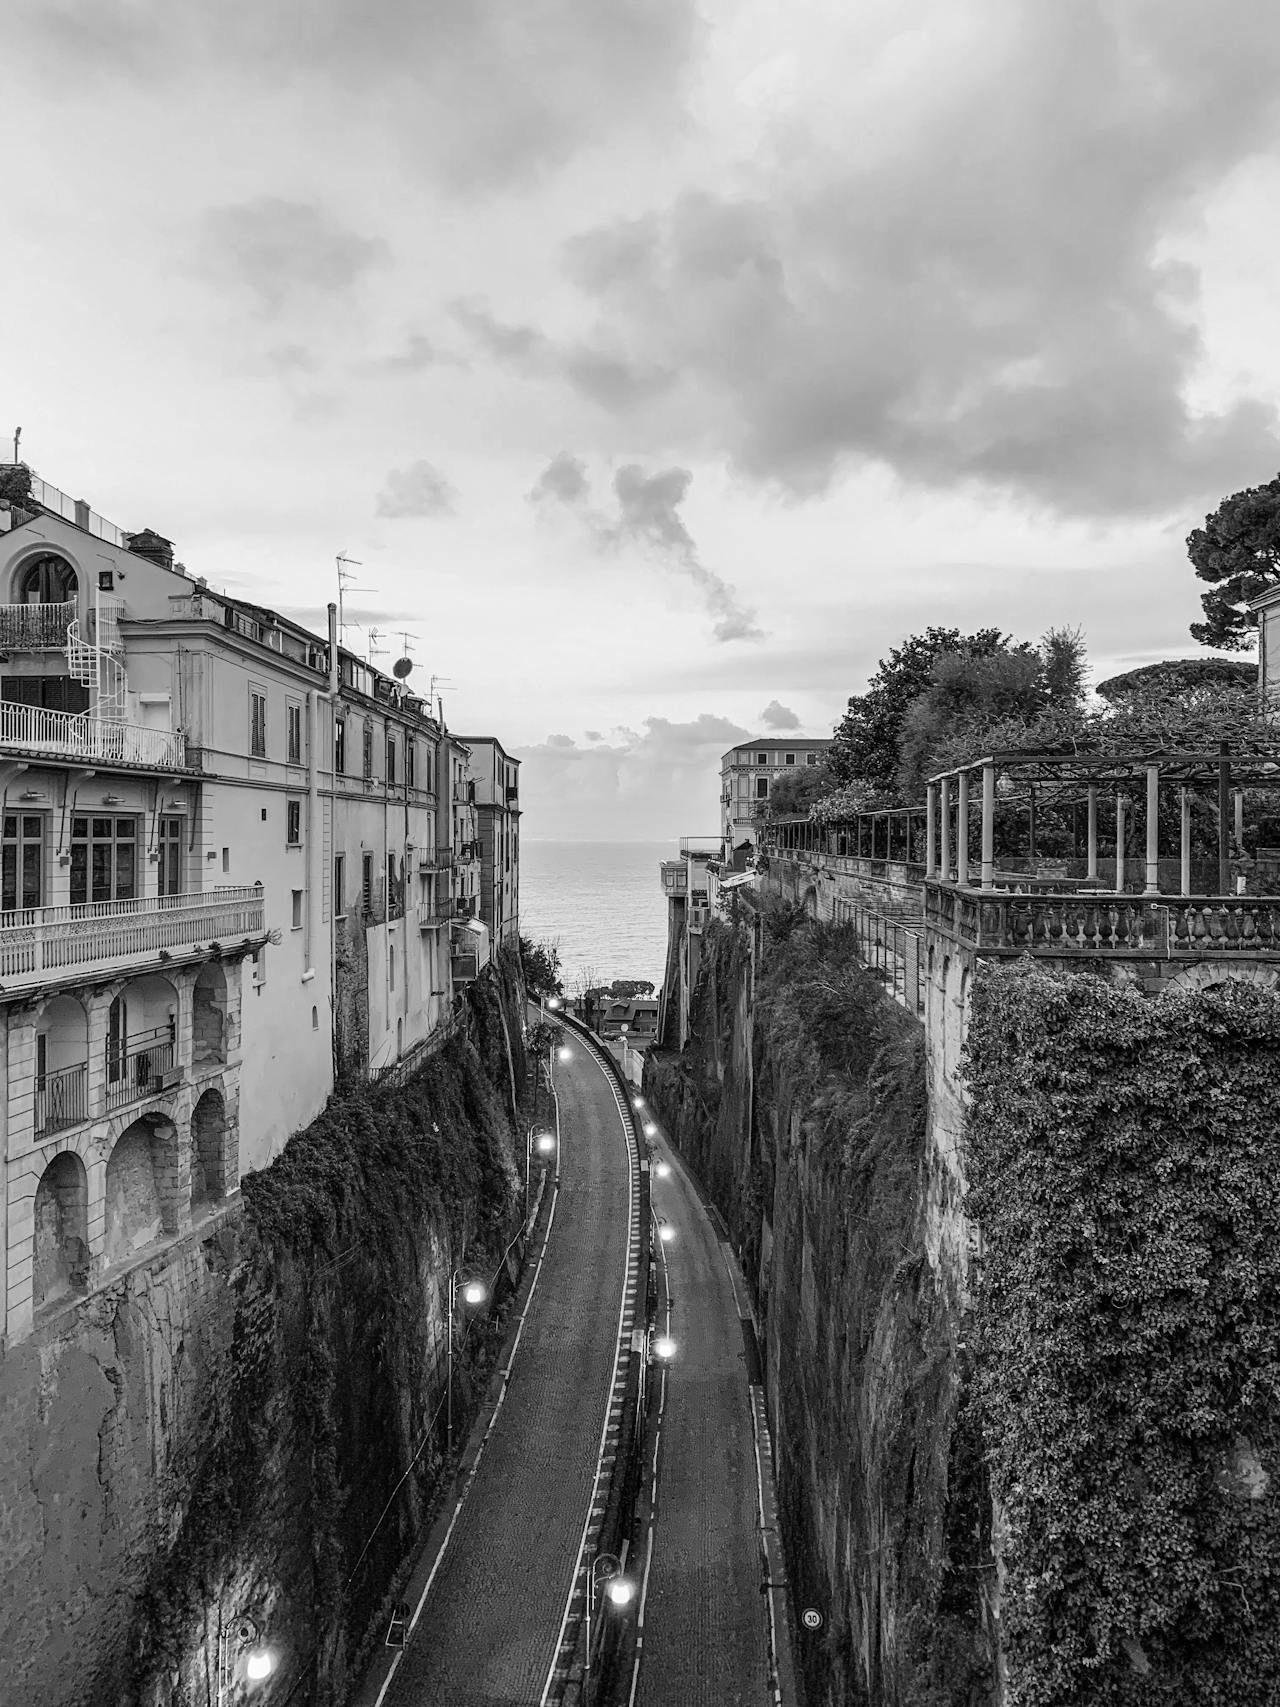 Road in Sorrento on a rainy day